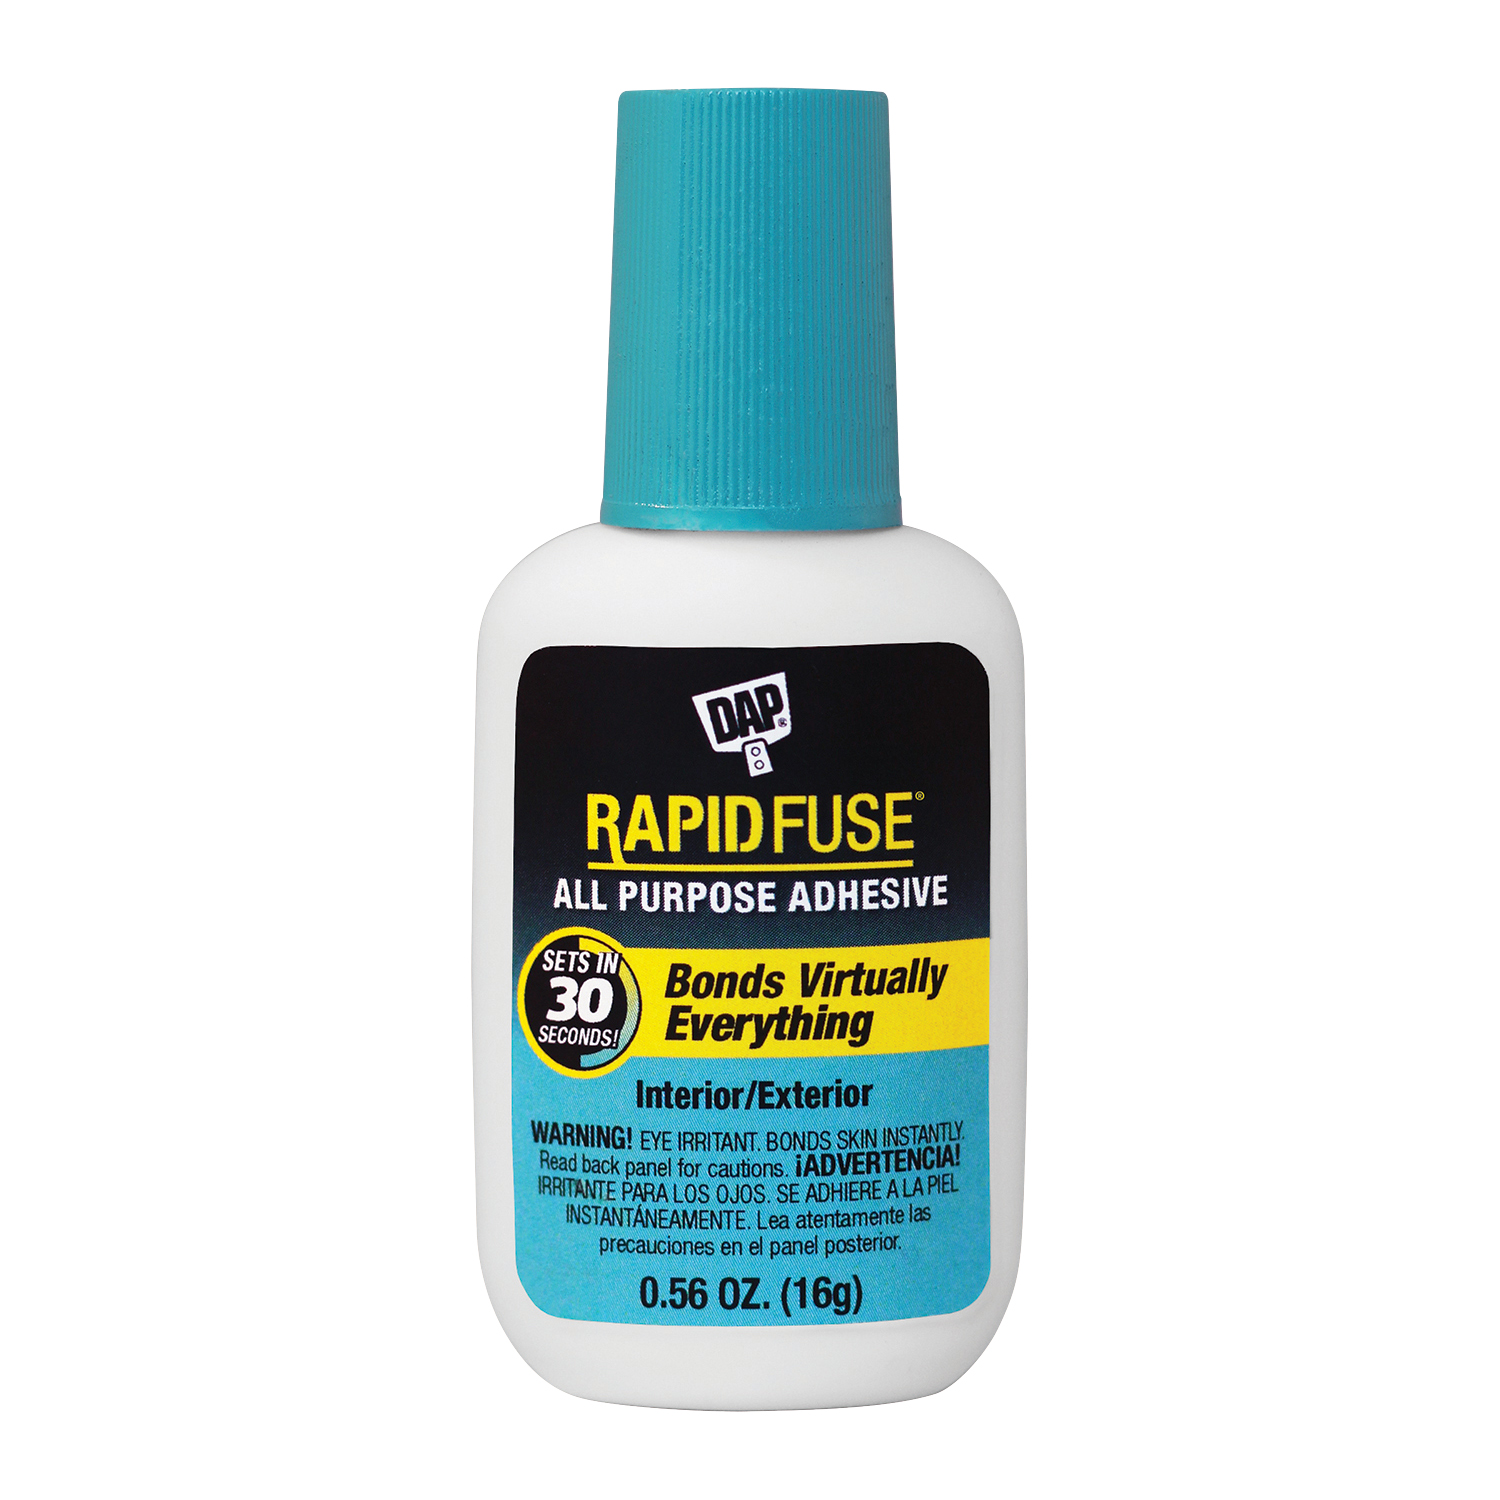 DAP® RapidFuse 00155 All-Purpose Adhesive, 0.85 oz Container, Bottle Container, Clear, Bonds To: Ceramic, Concrete, Fabric, Glass, Laminate, Leather, Metal, Paper, Plastic, Rubber, Wood, 30 min Curing